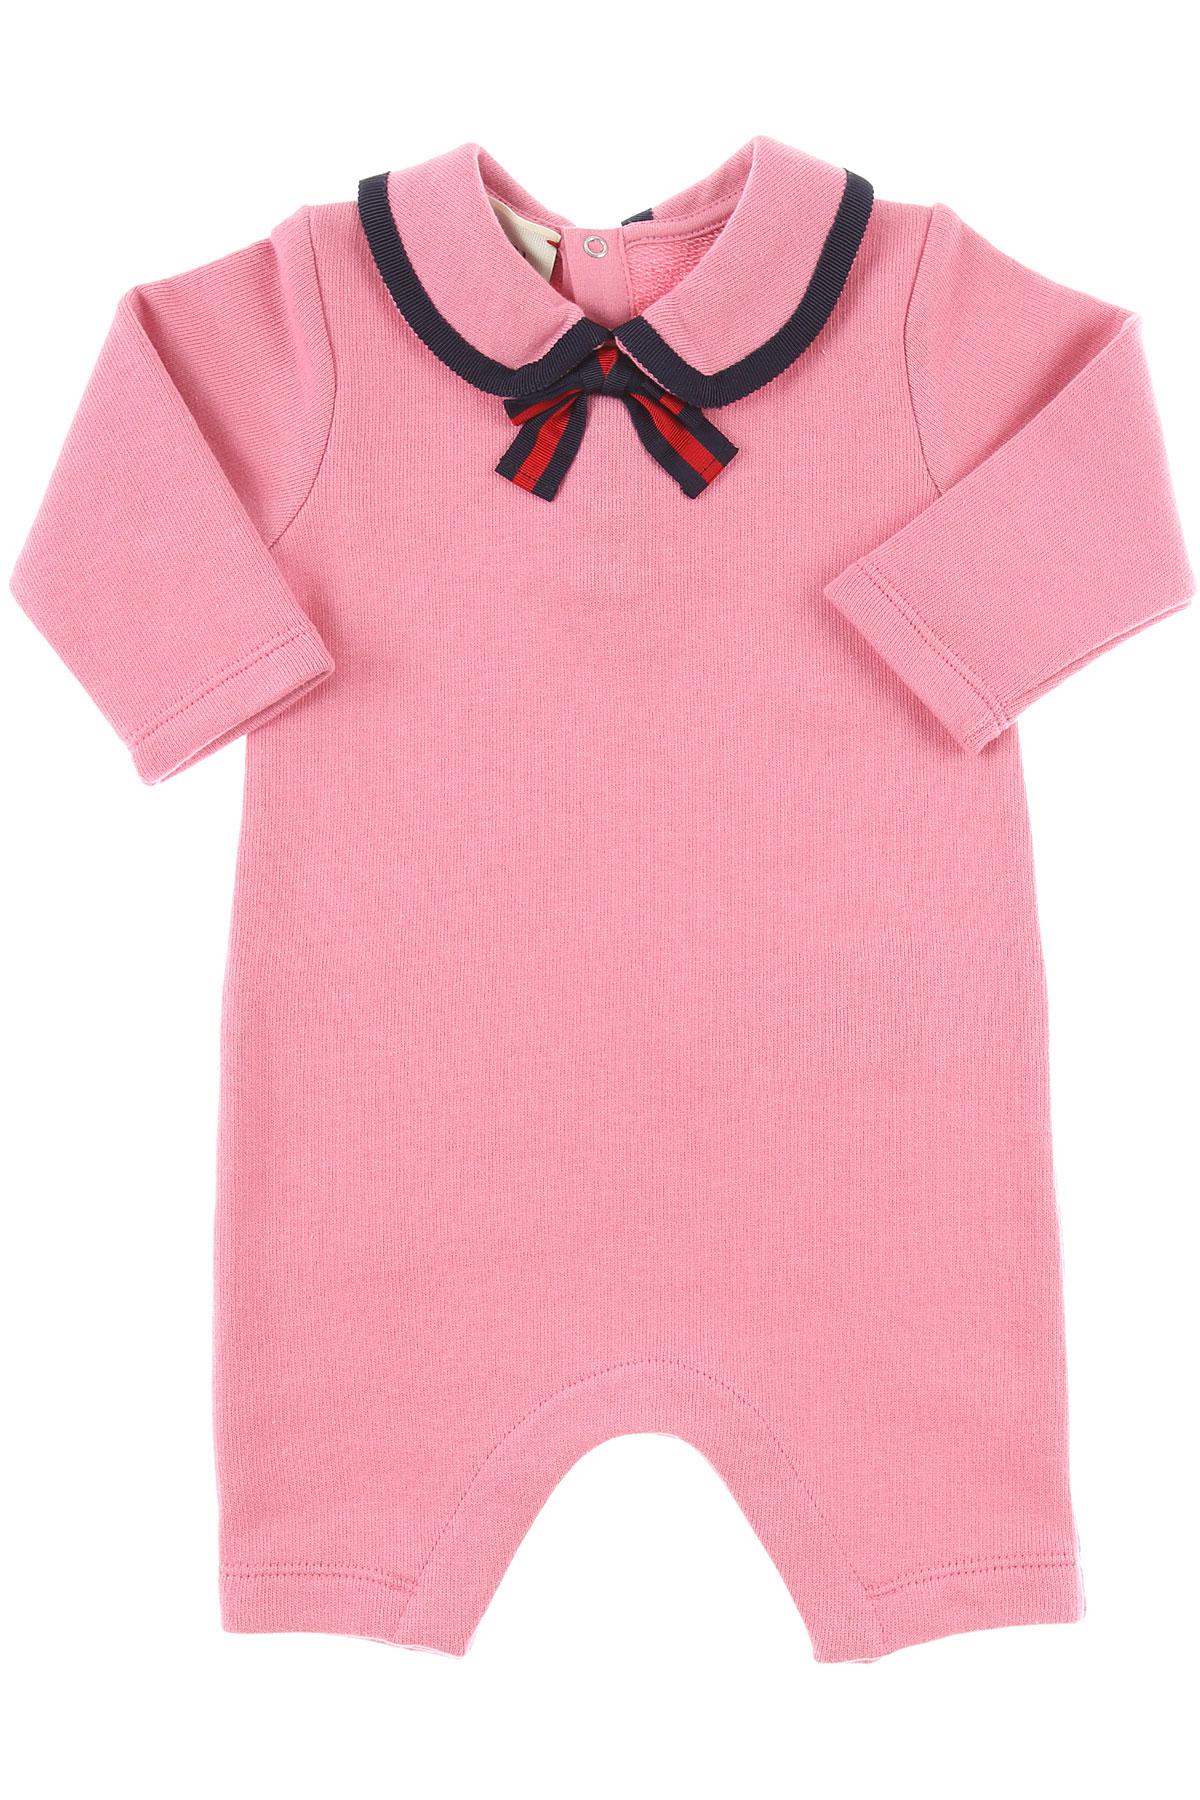 gucci baby girl sale